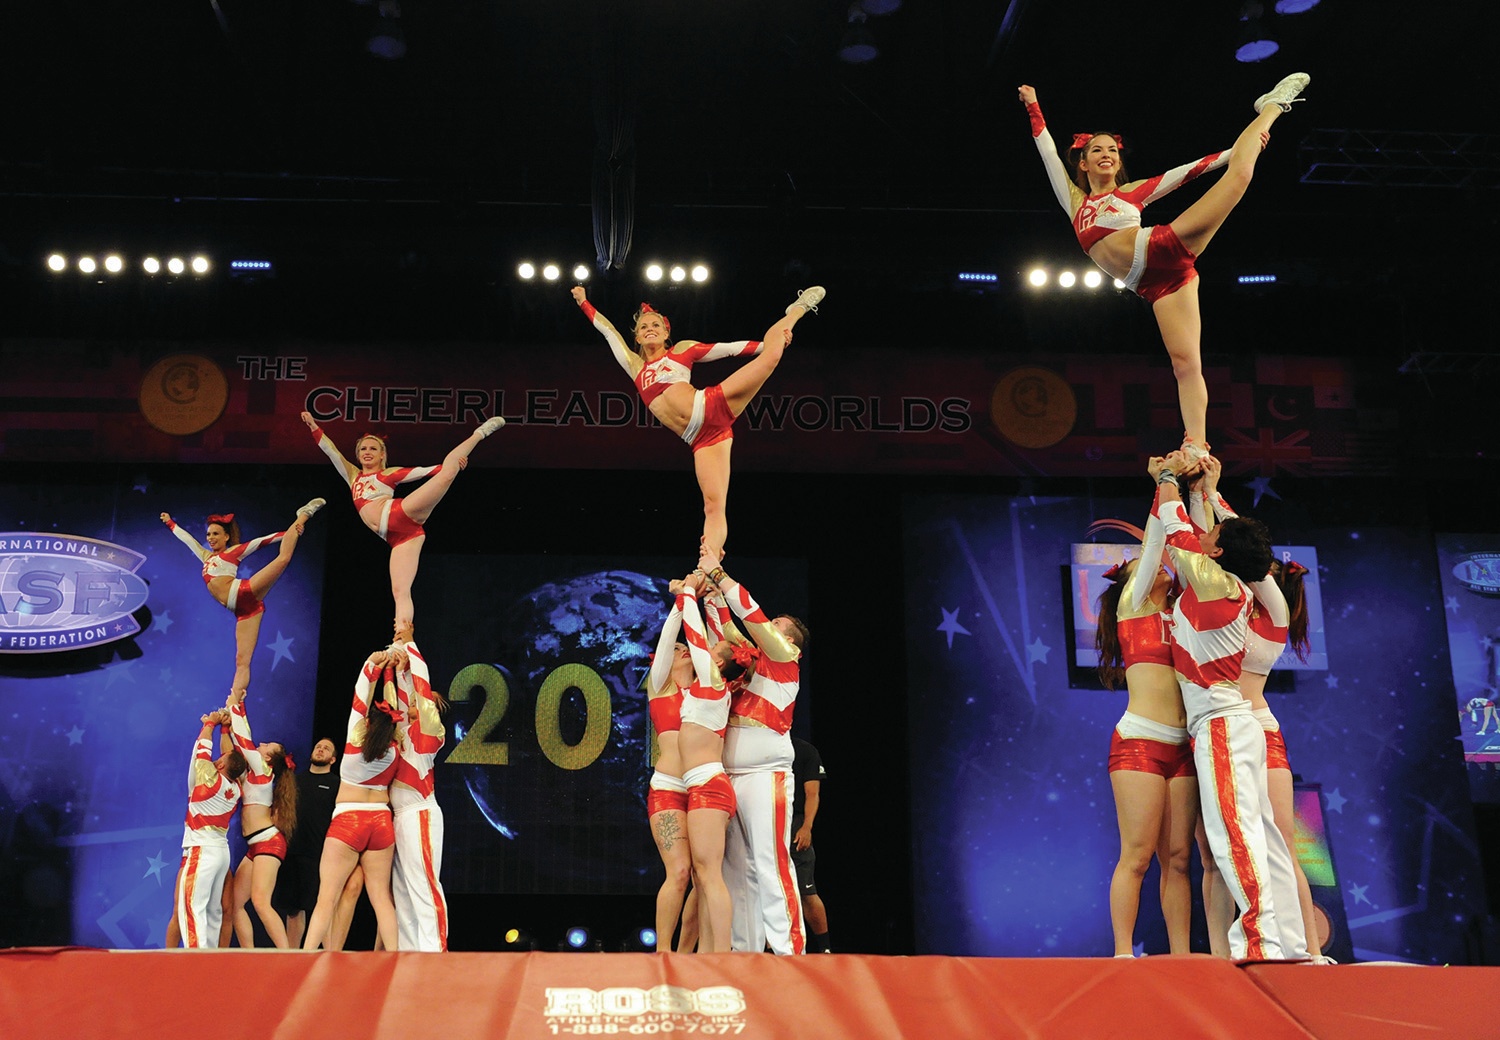 CLASS ACT - Athletes from Premier Academy competed in the Cheerleading World Championships this past April.